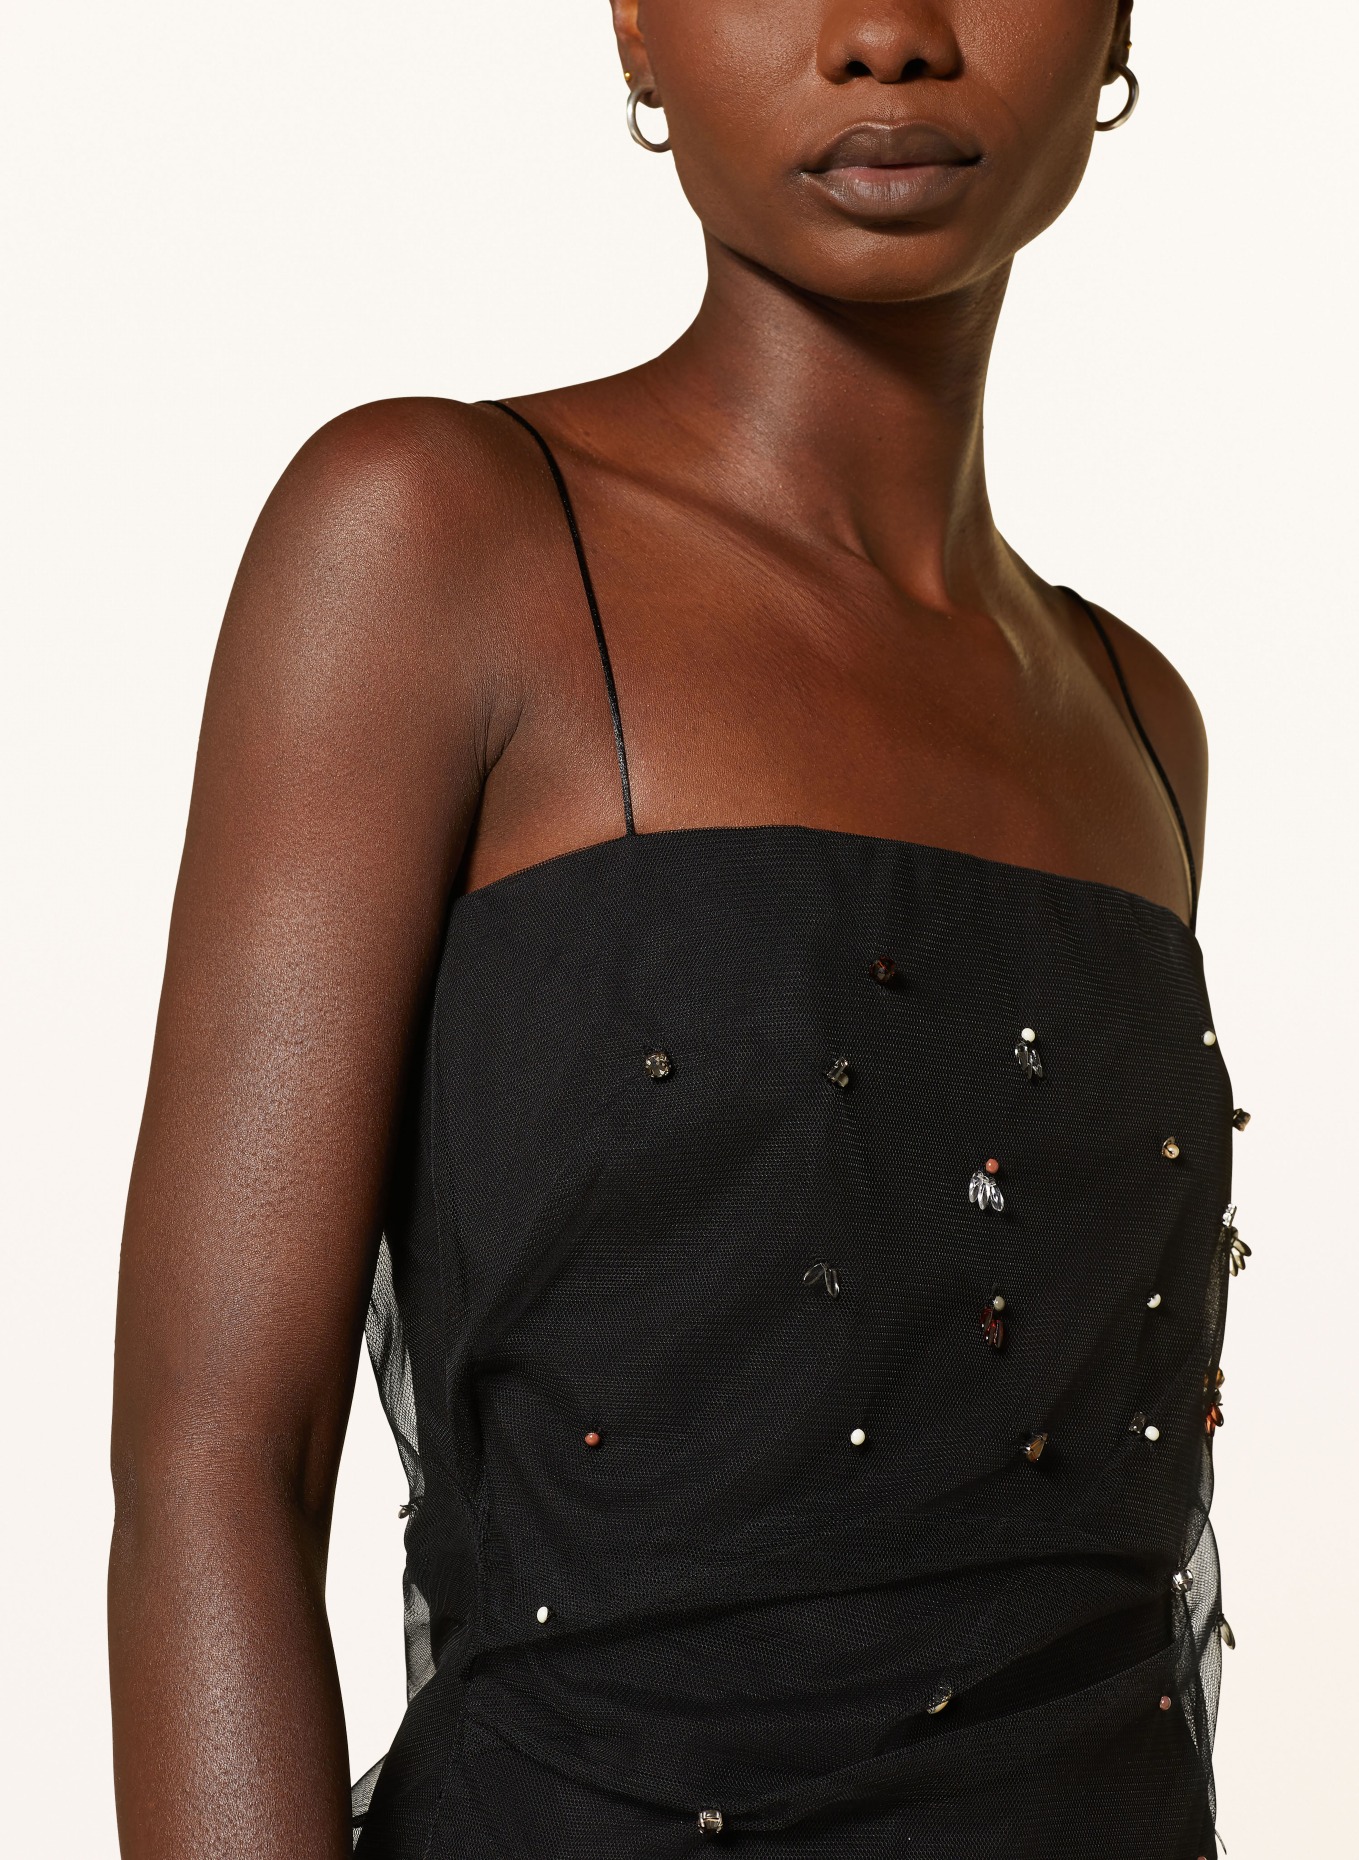 DOROTHEE SCHUMACHER Blouse top EMOTIONAL ESSENCE I TOP with tulle and decorative beads, Color: BLACK (Image 4)